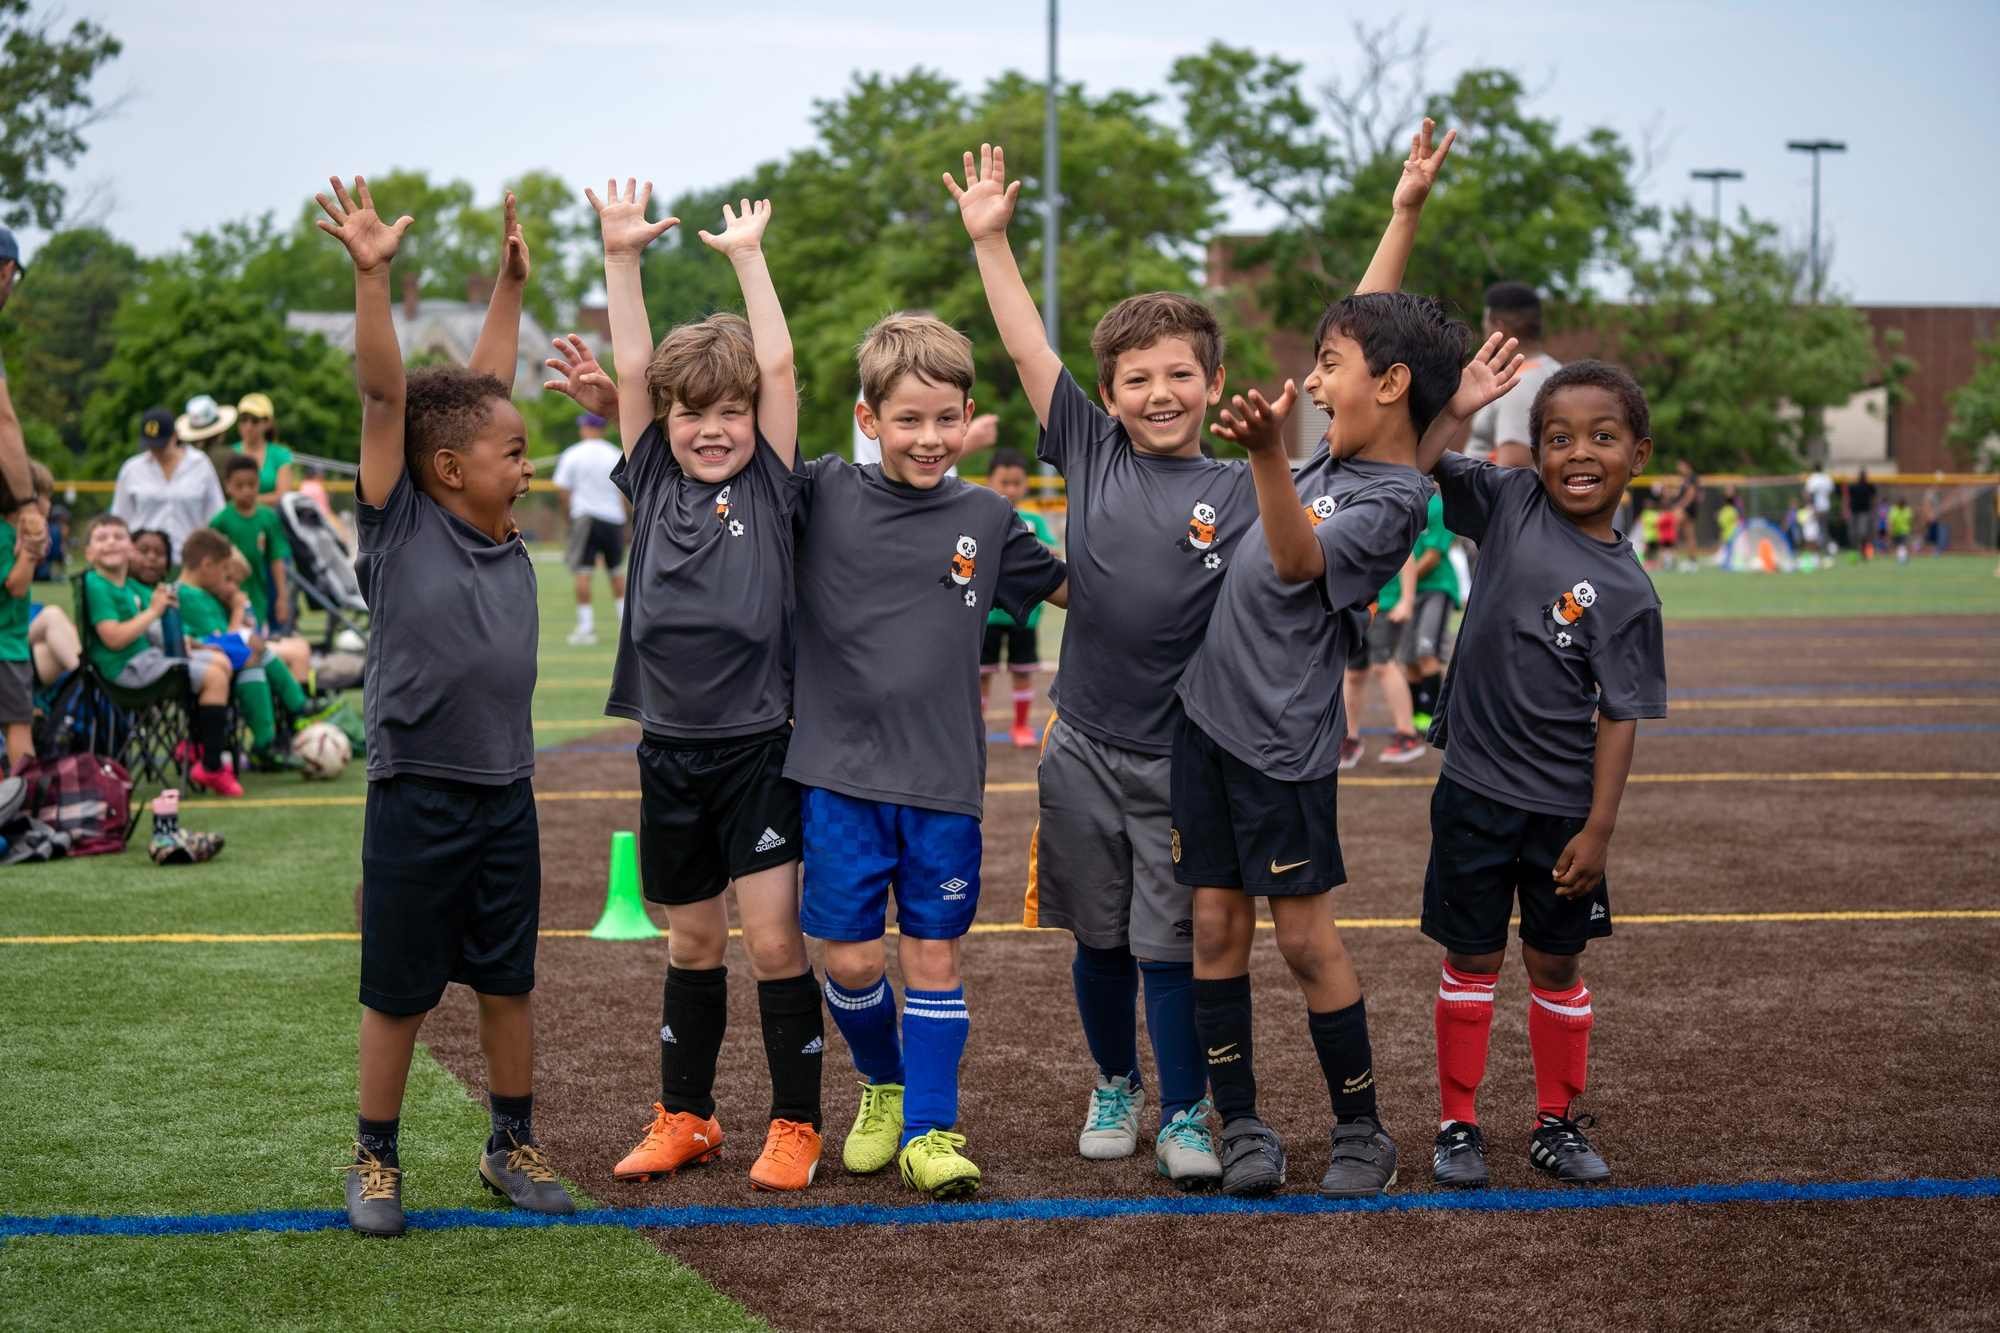 Dc-way-soccer-club-for-kids-in-washington-dc-capitol-hill-league-at-brentwood-hamilton-park-06-03-2023 0056.jpg